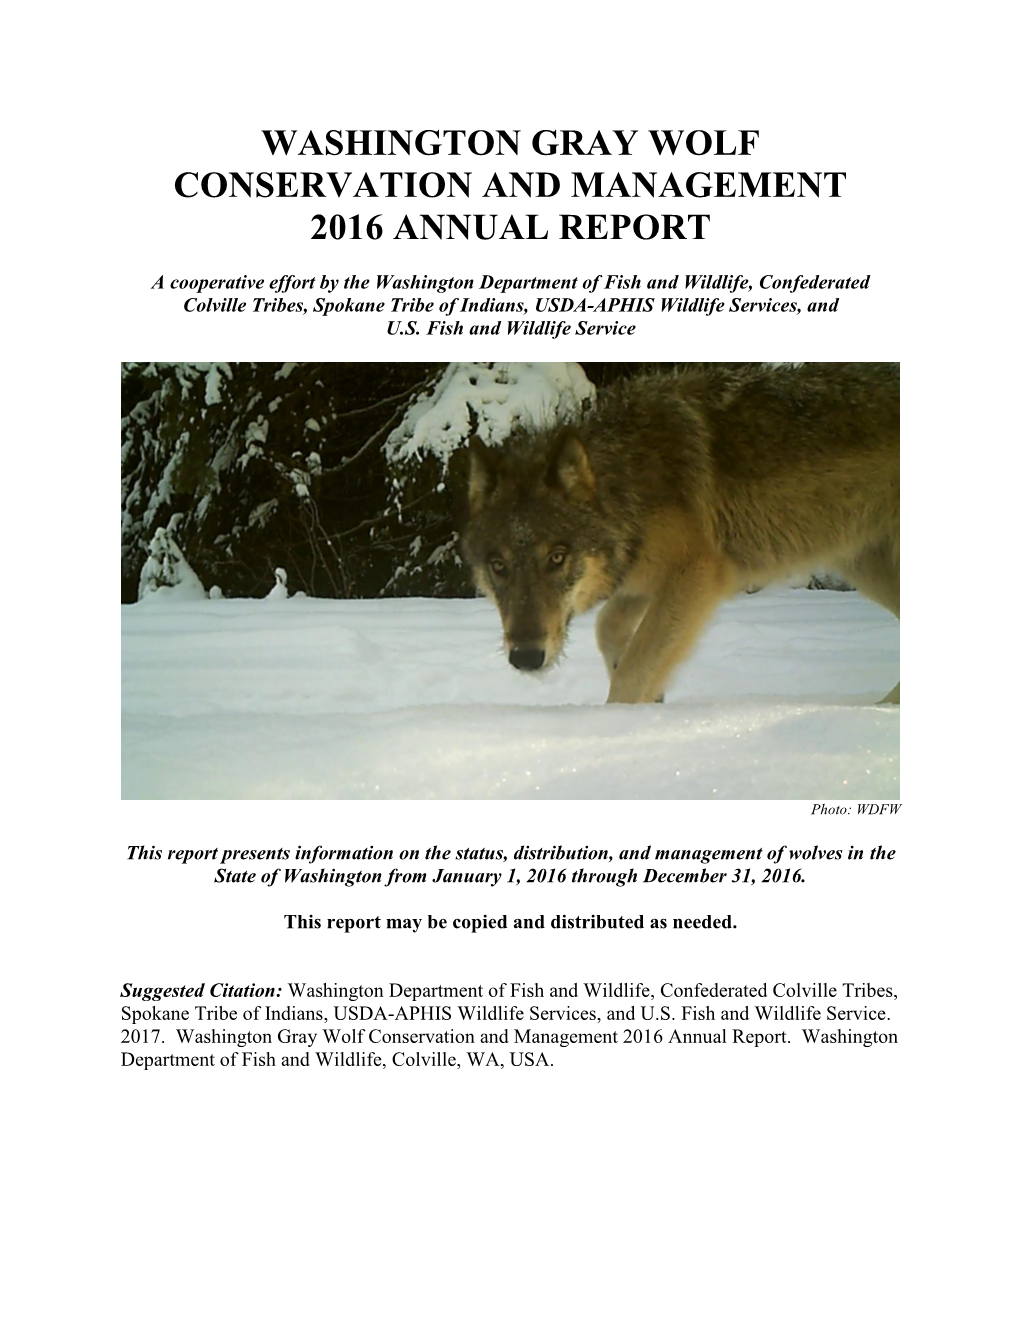 Washington Gray Wolf Conservation and Management 2016 Annual Report